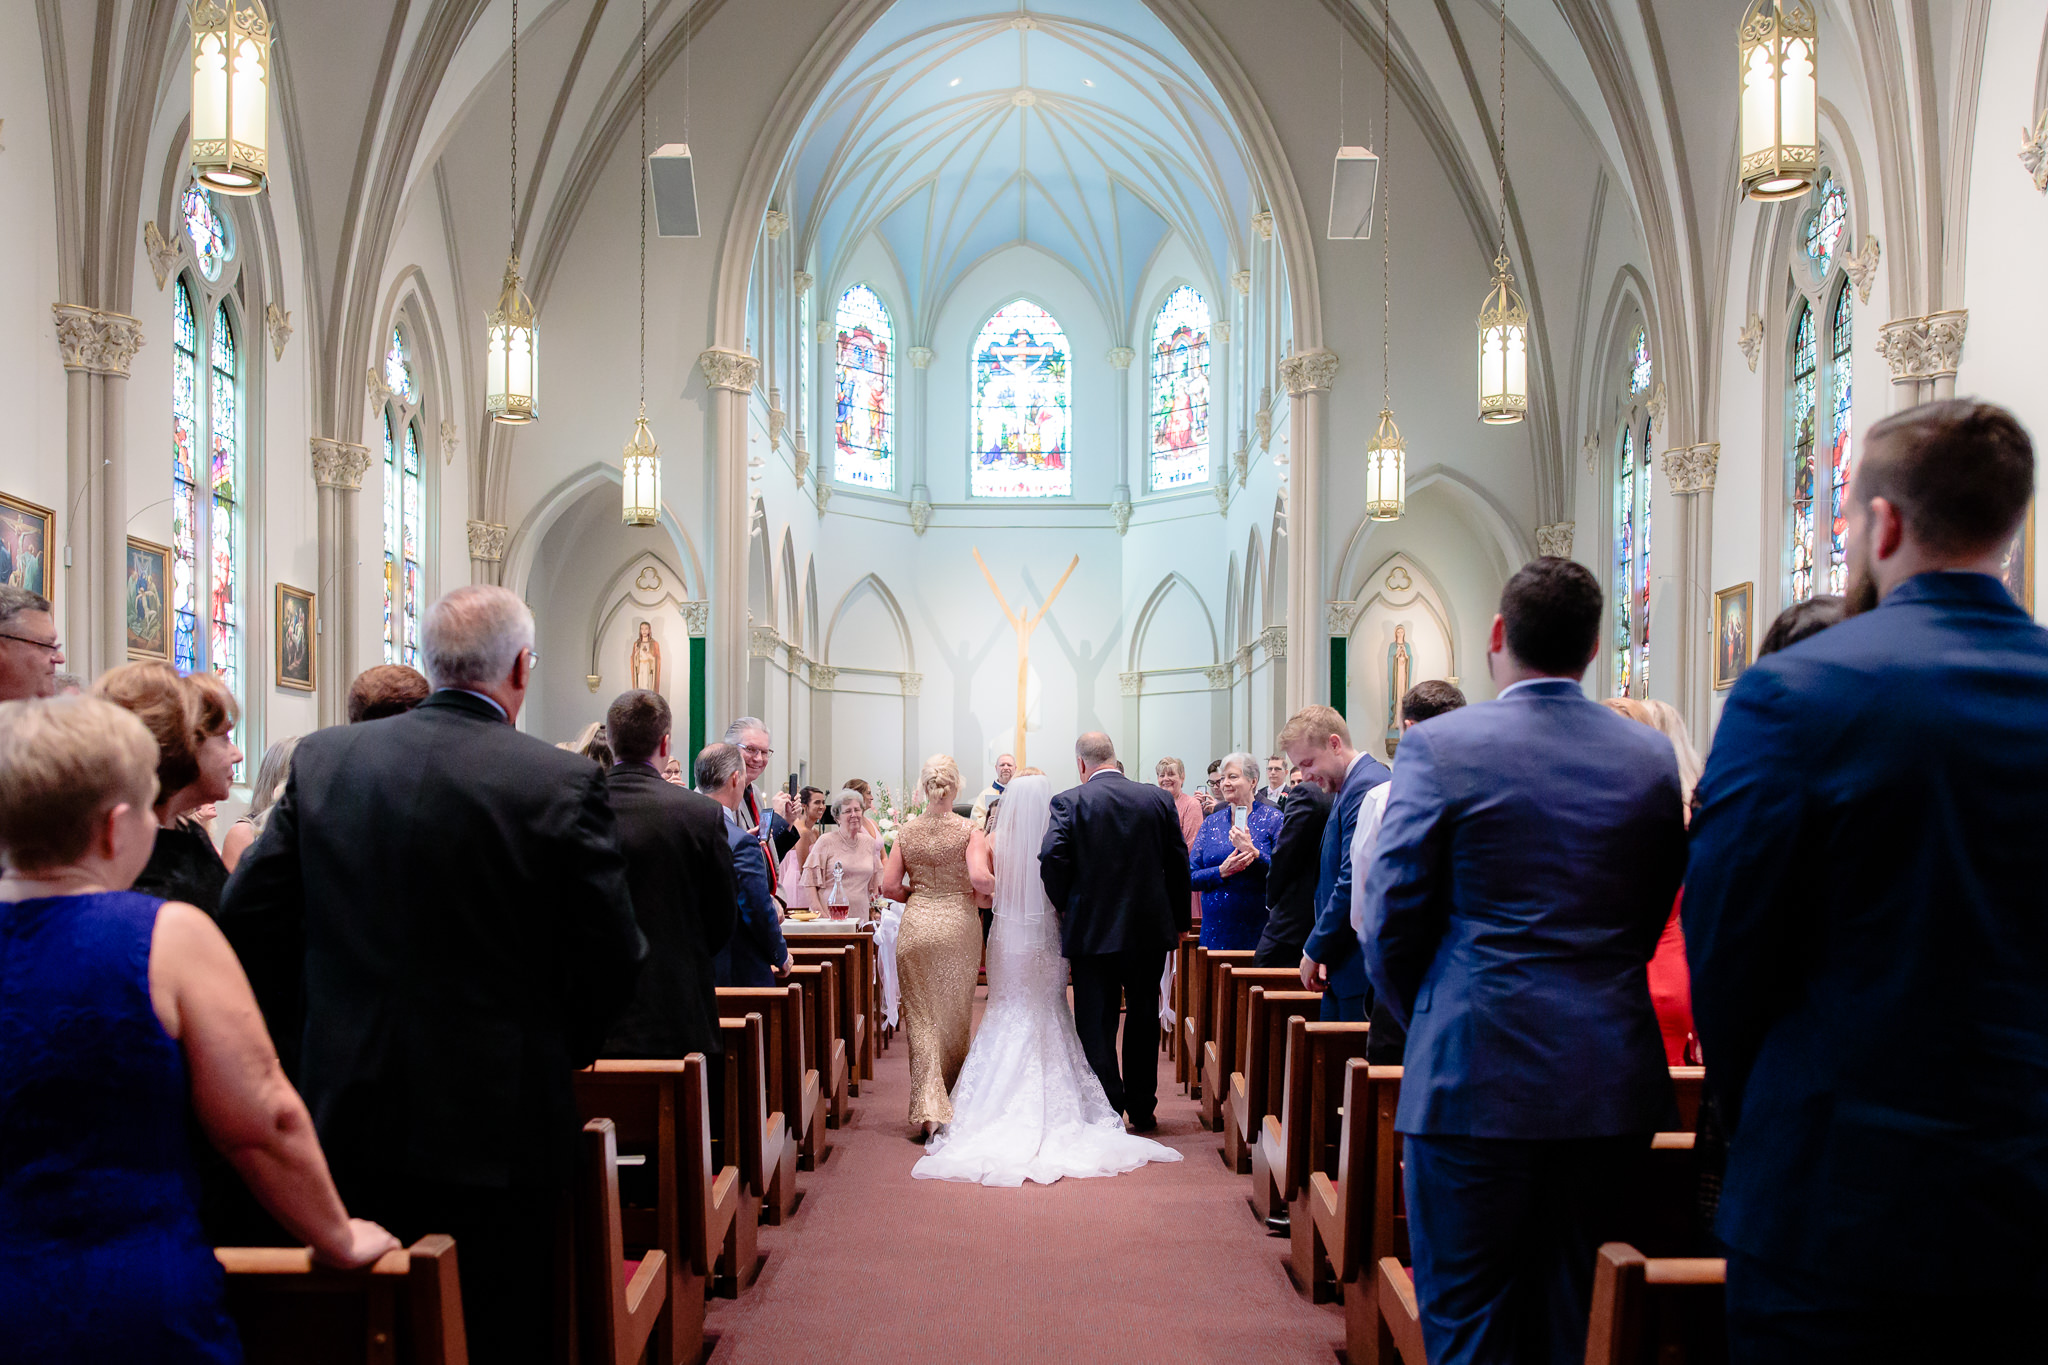 Bride's parents walk her down the aisle at her Duquesne University wedding ceremony